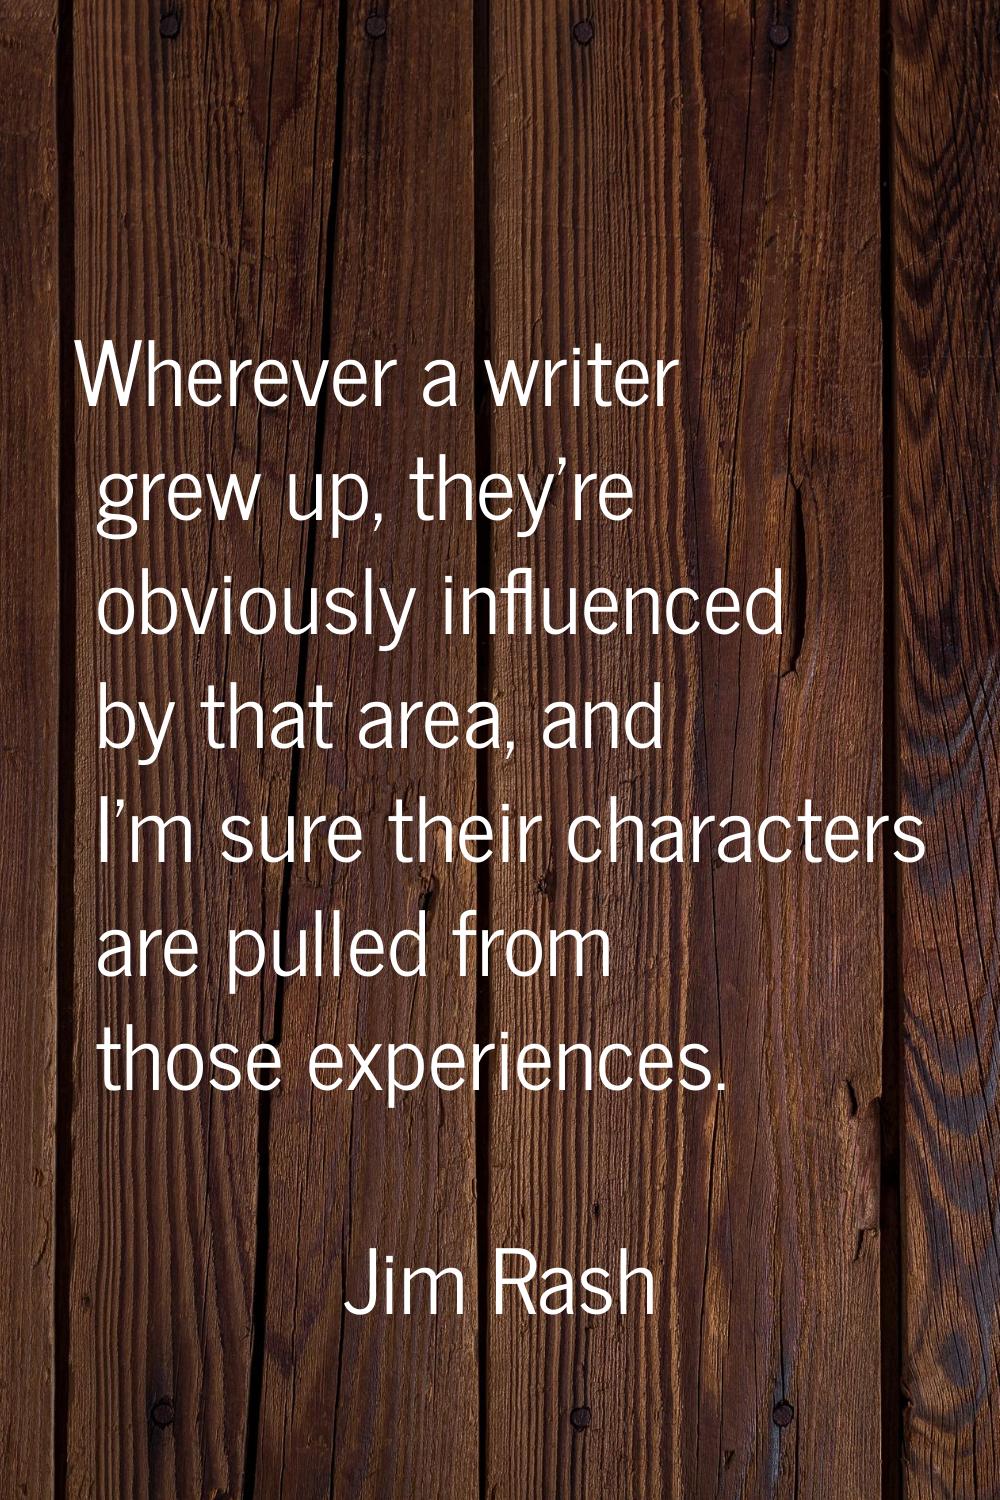 Wherever a writer grew up, they're obviously influenced by that area, and I'm sure their characters